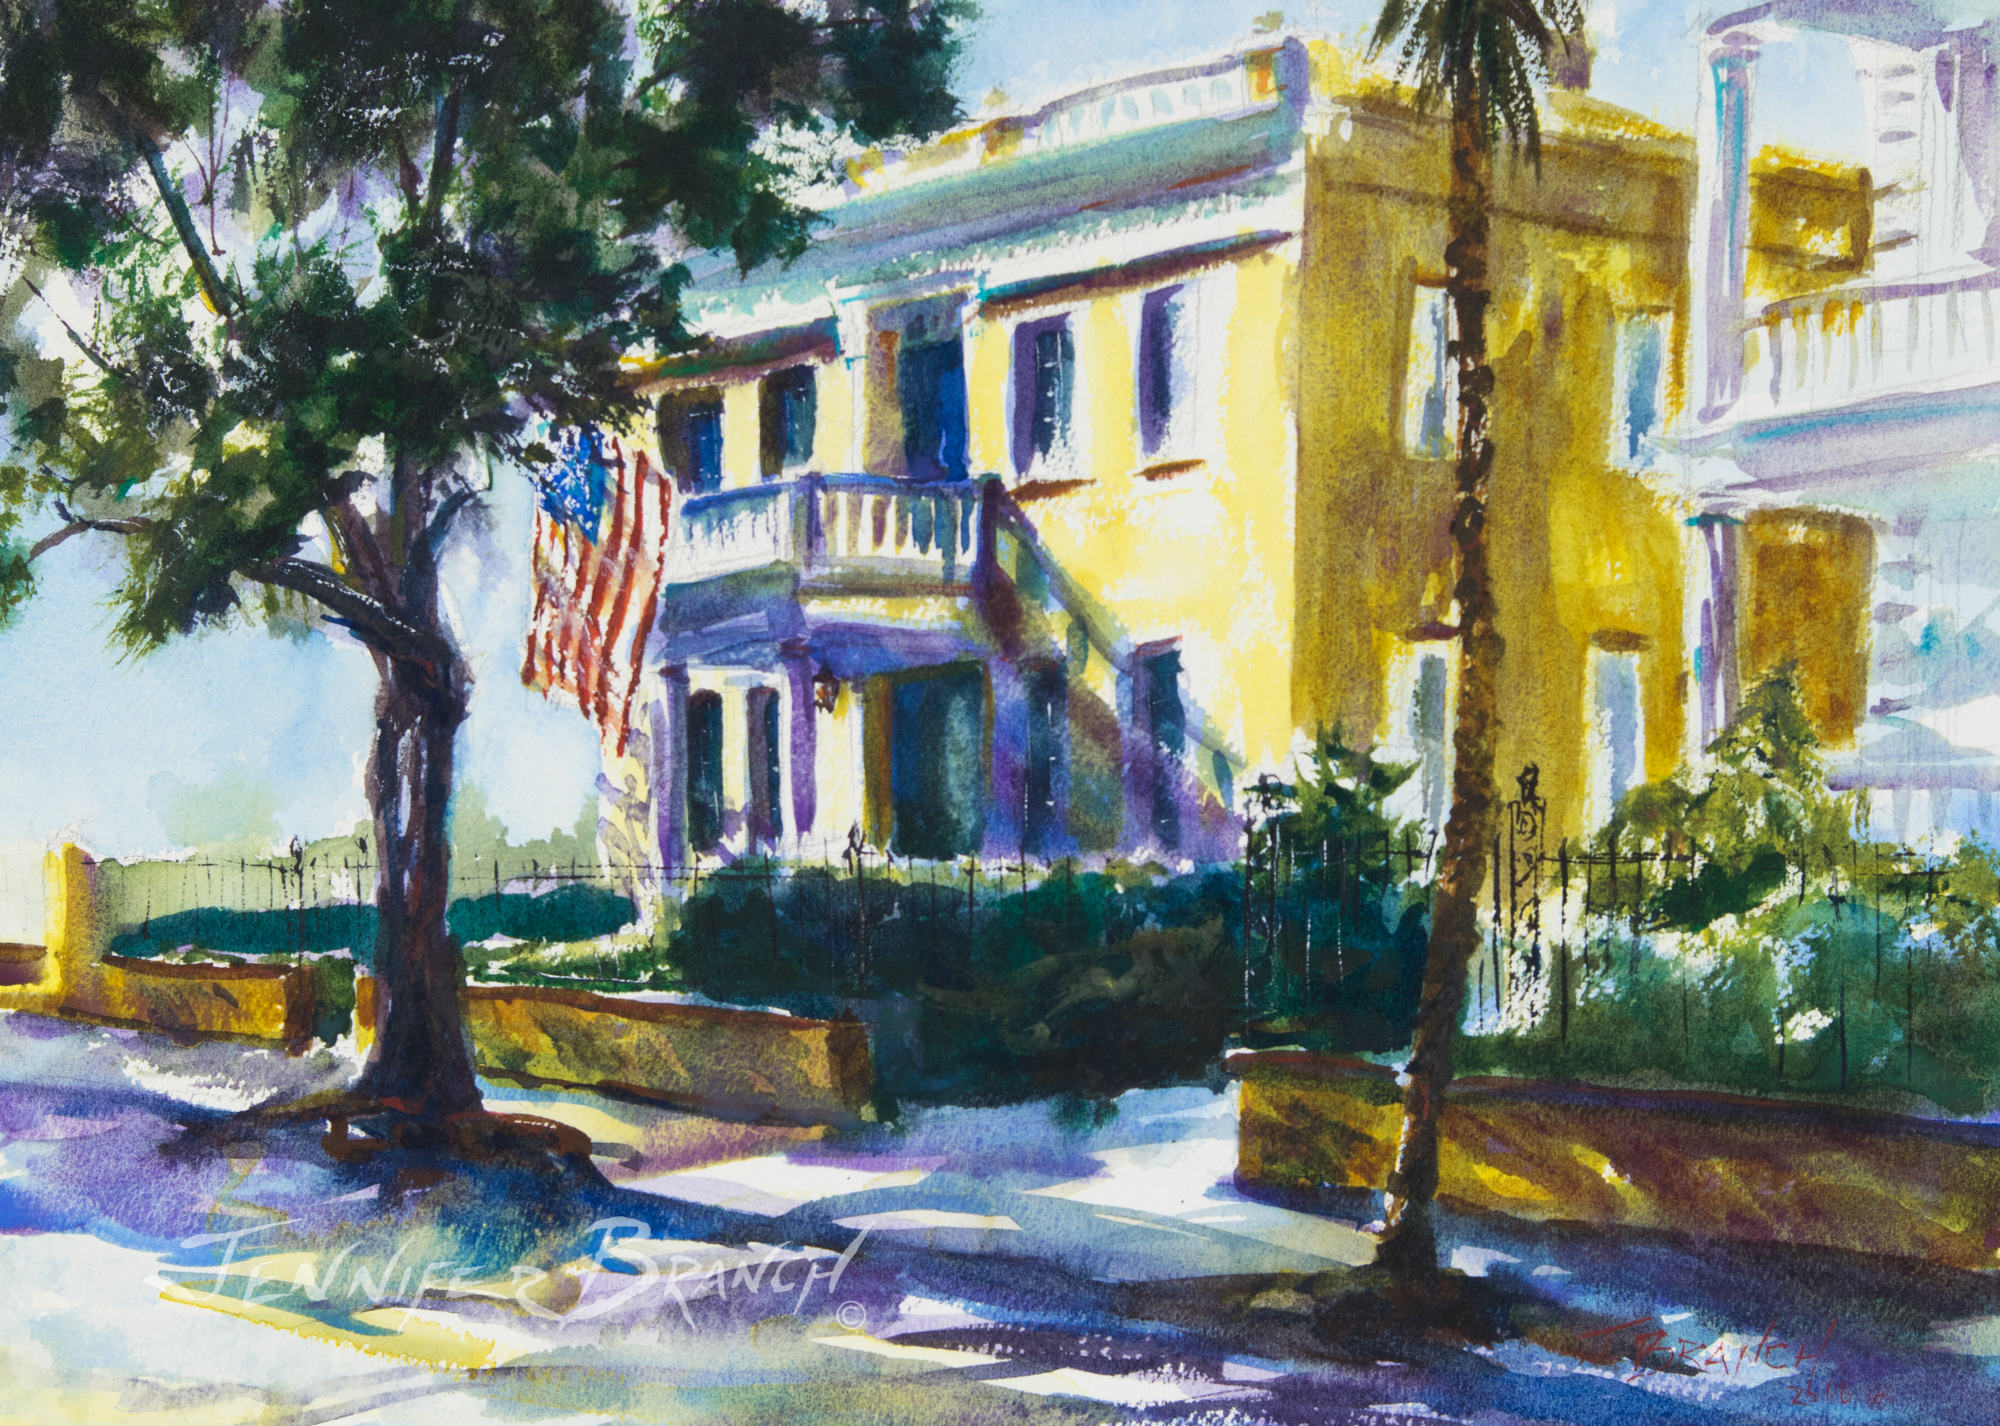 Charleston watercolor painting of a beautiful house flying an American flag.
 by Jennifer Branch.